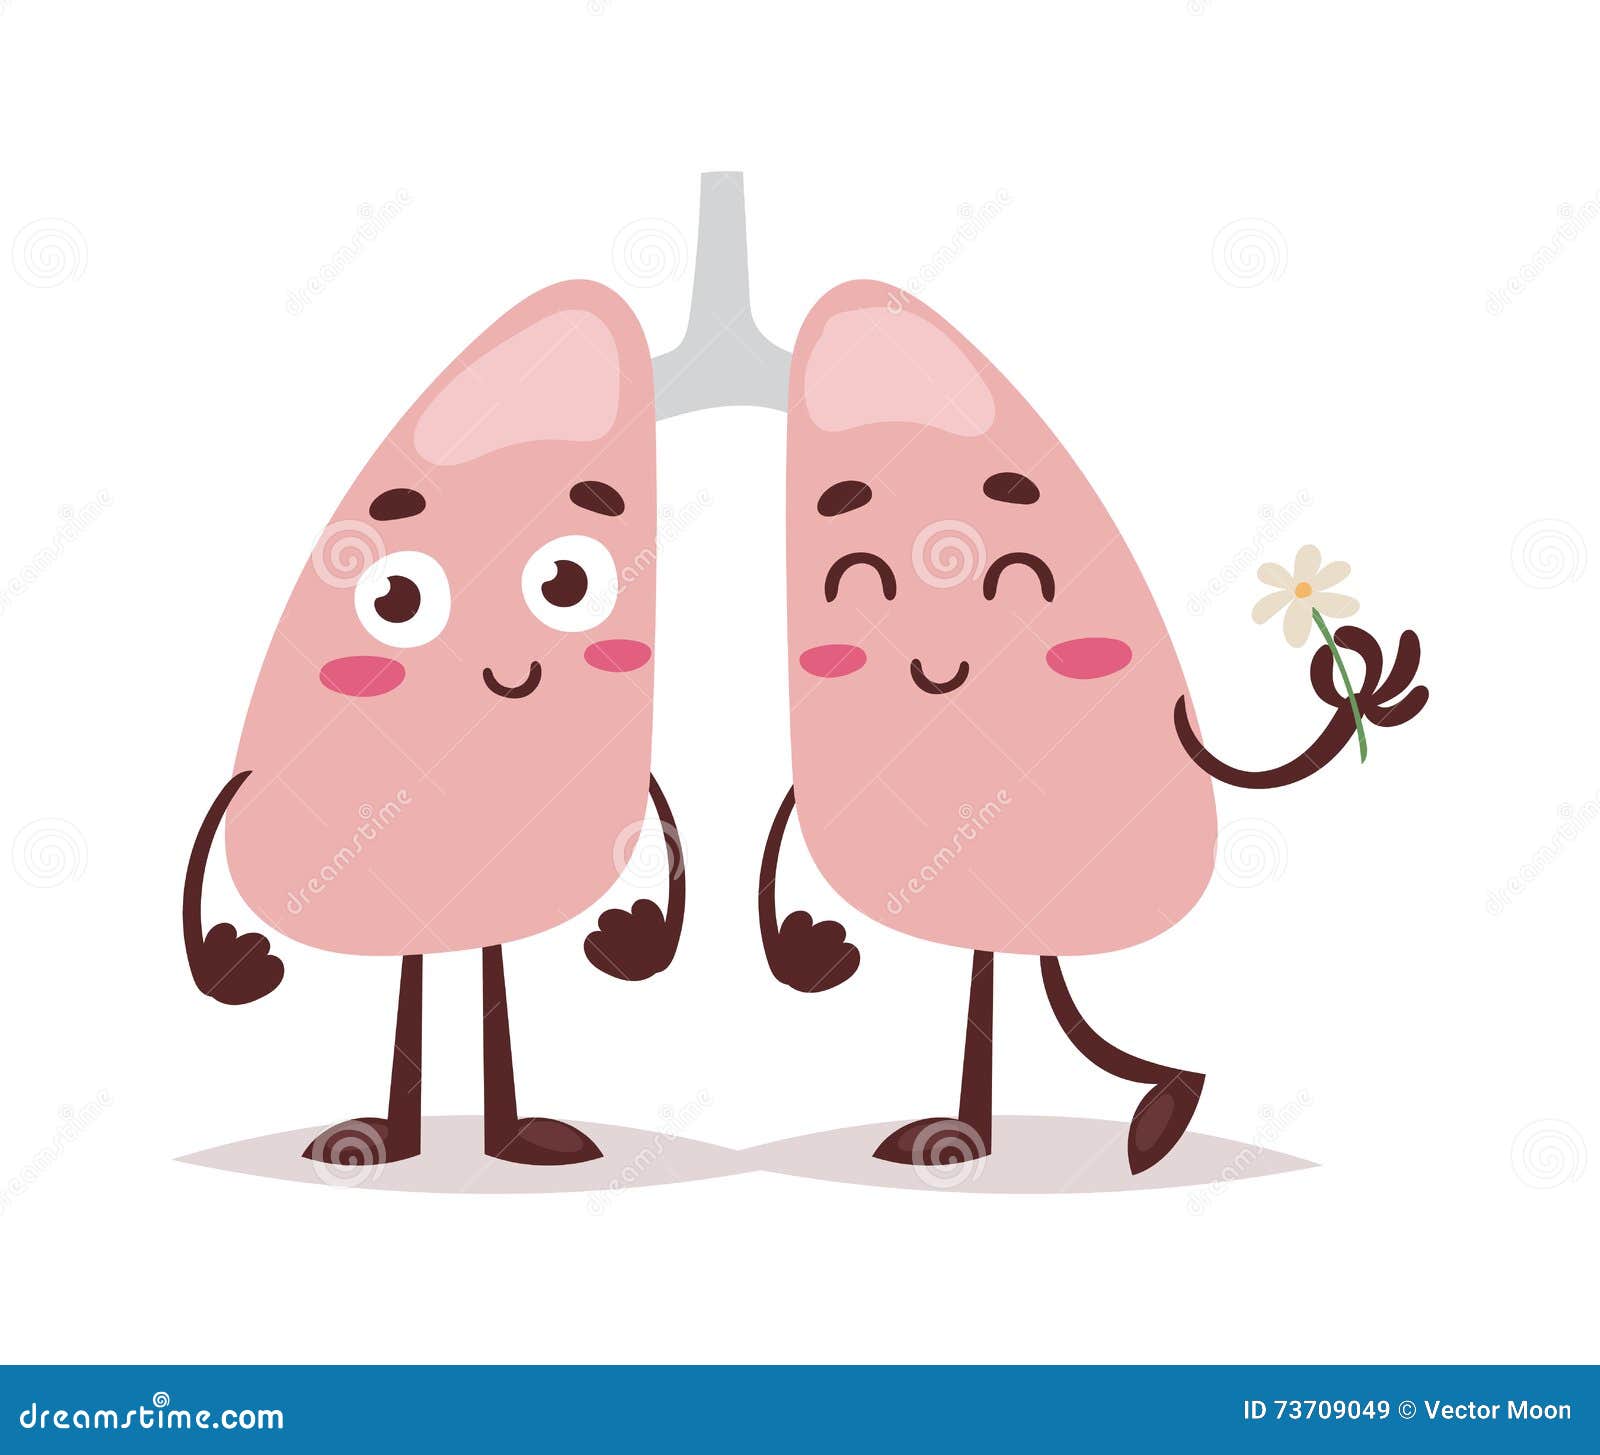 clipart human lungs - photo #38